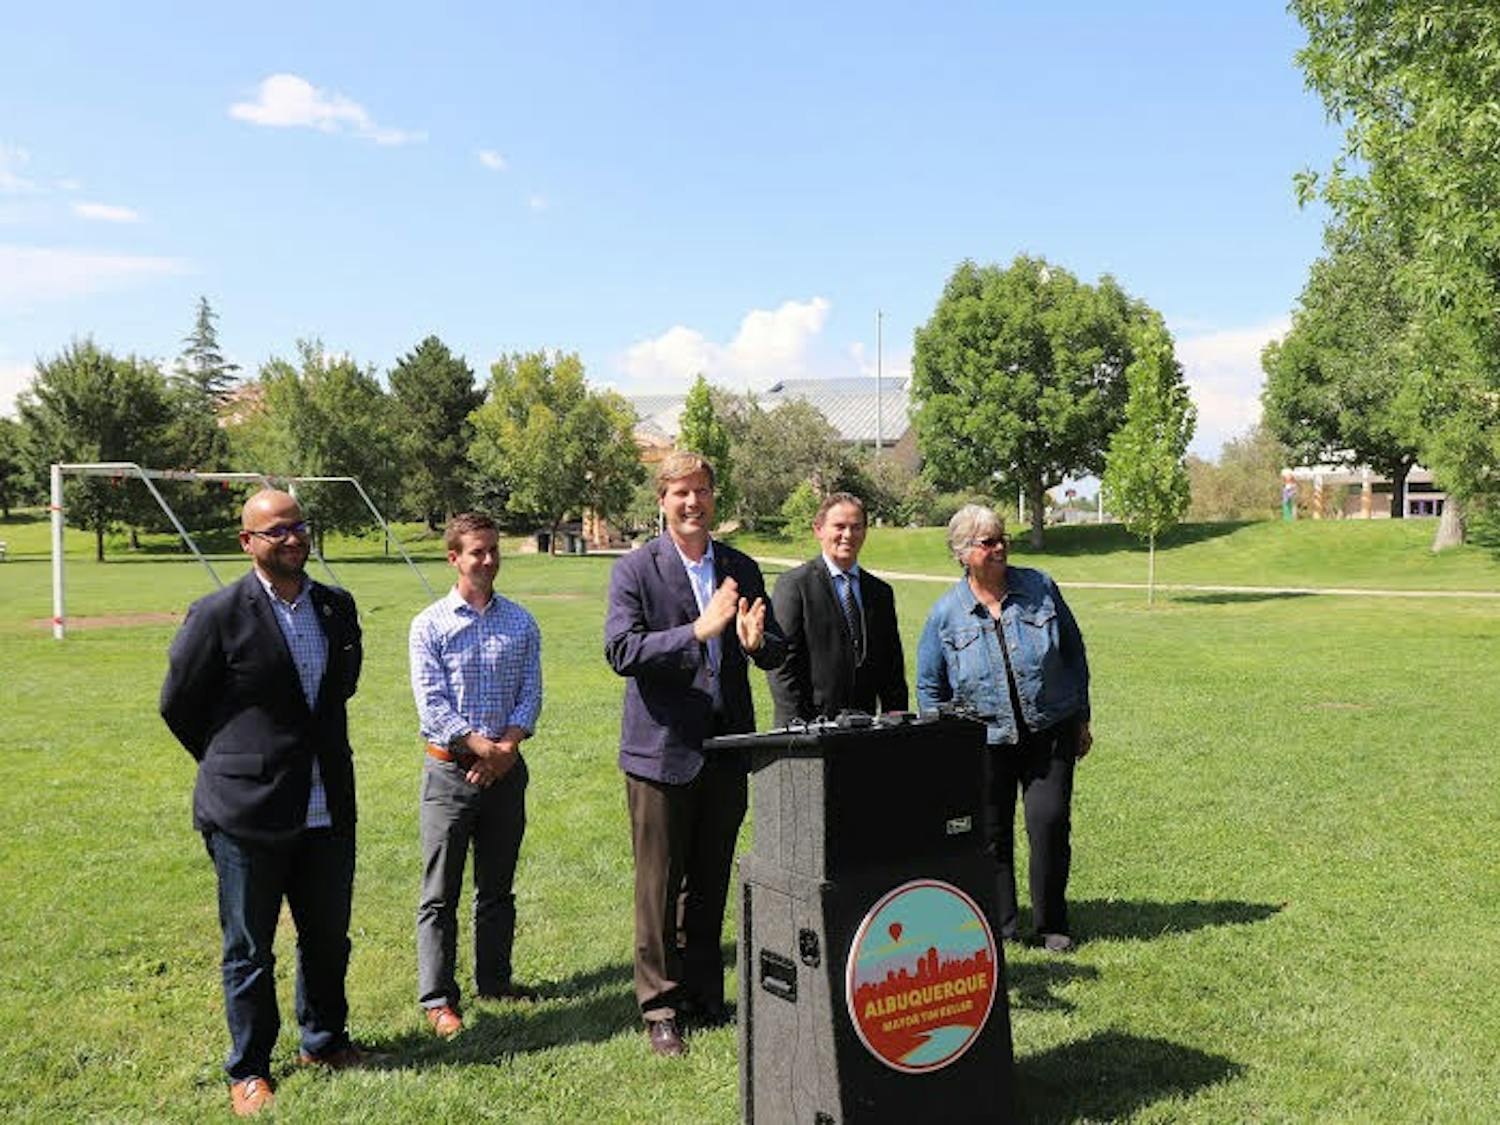 Albuquerque mayor Tim Keller speaks at a press conference Thursday August 16, 2018 urging the Board of Regents to stay any decision on cutting sports at the Special meeting Friday.